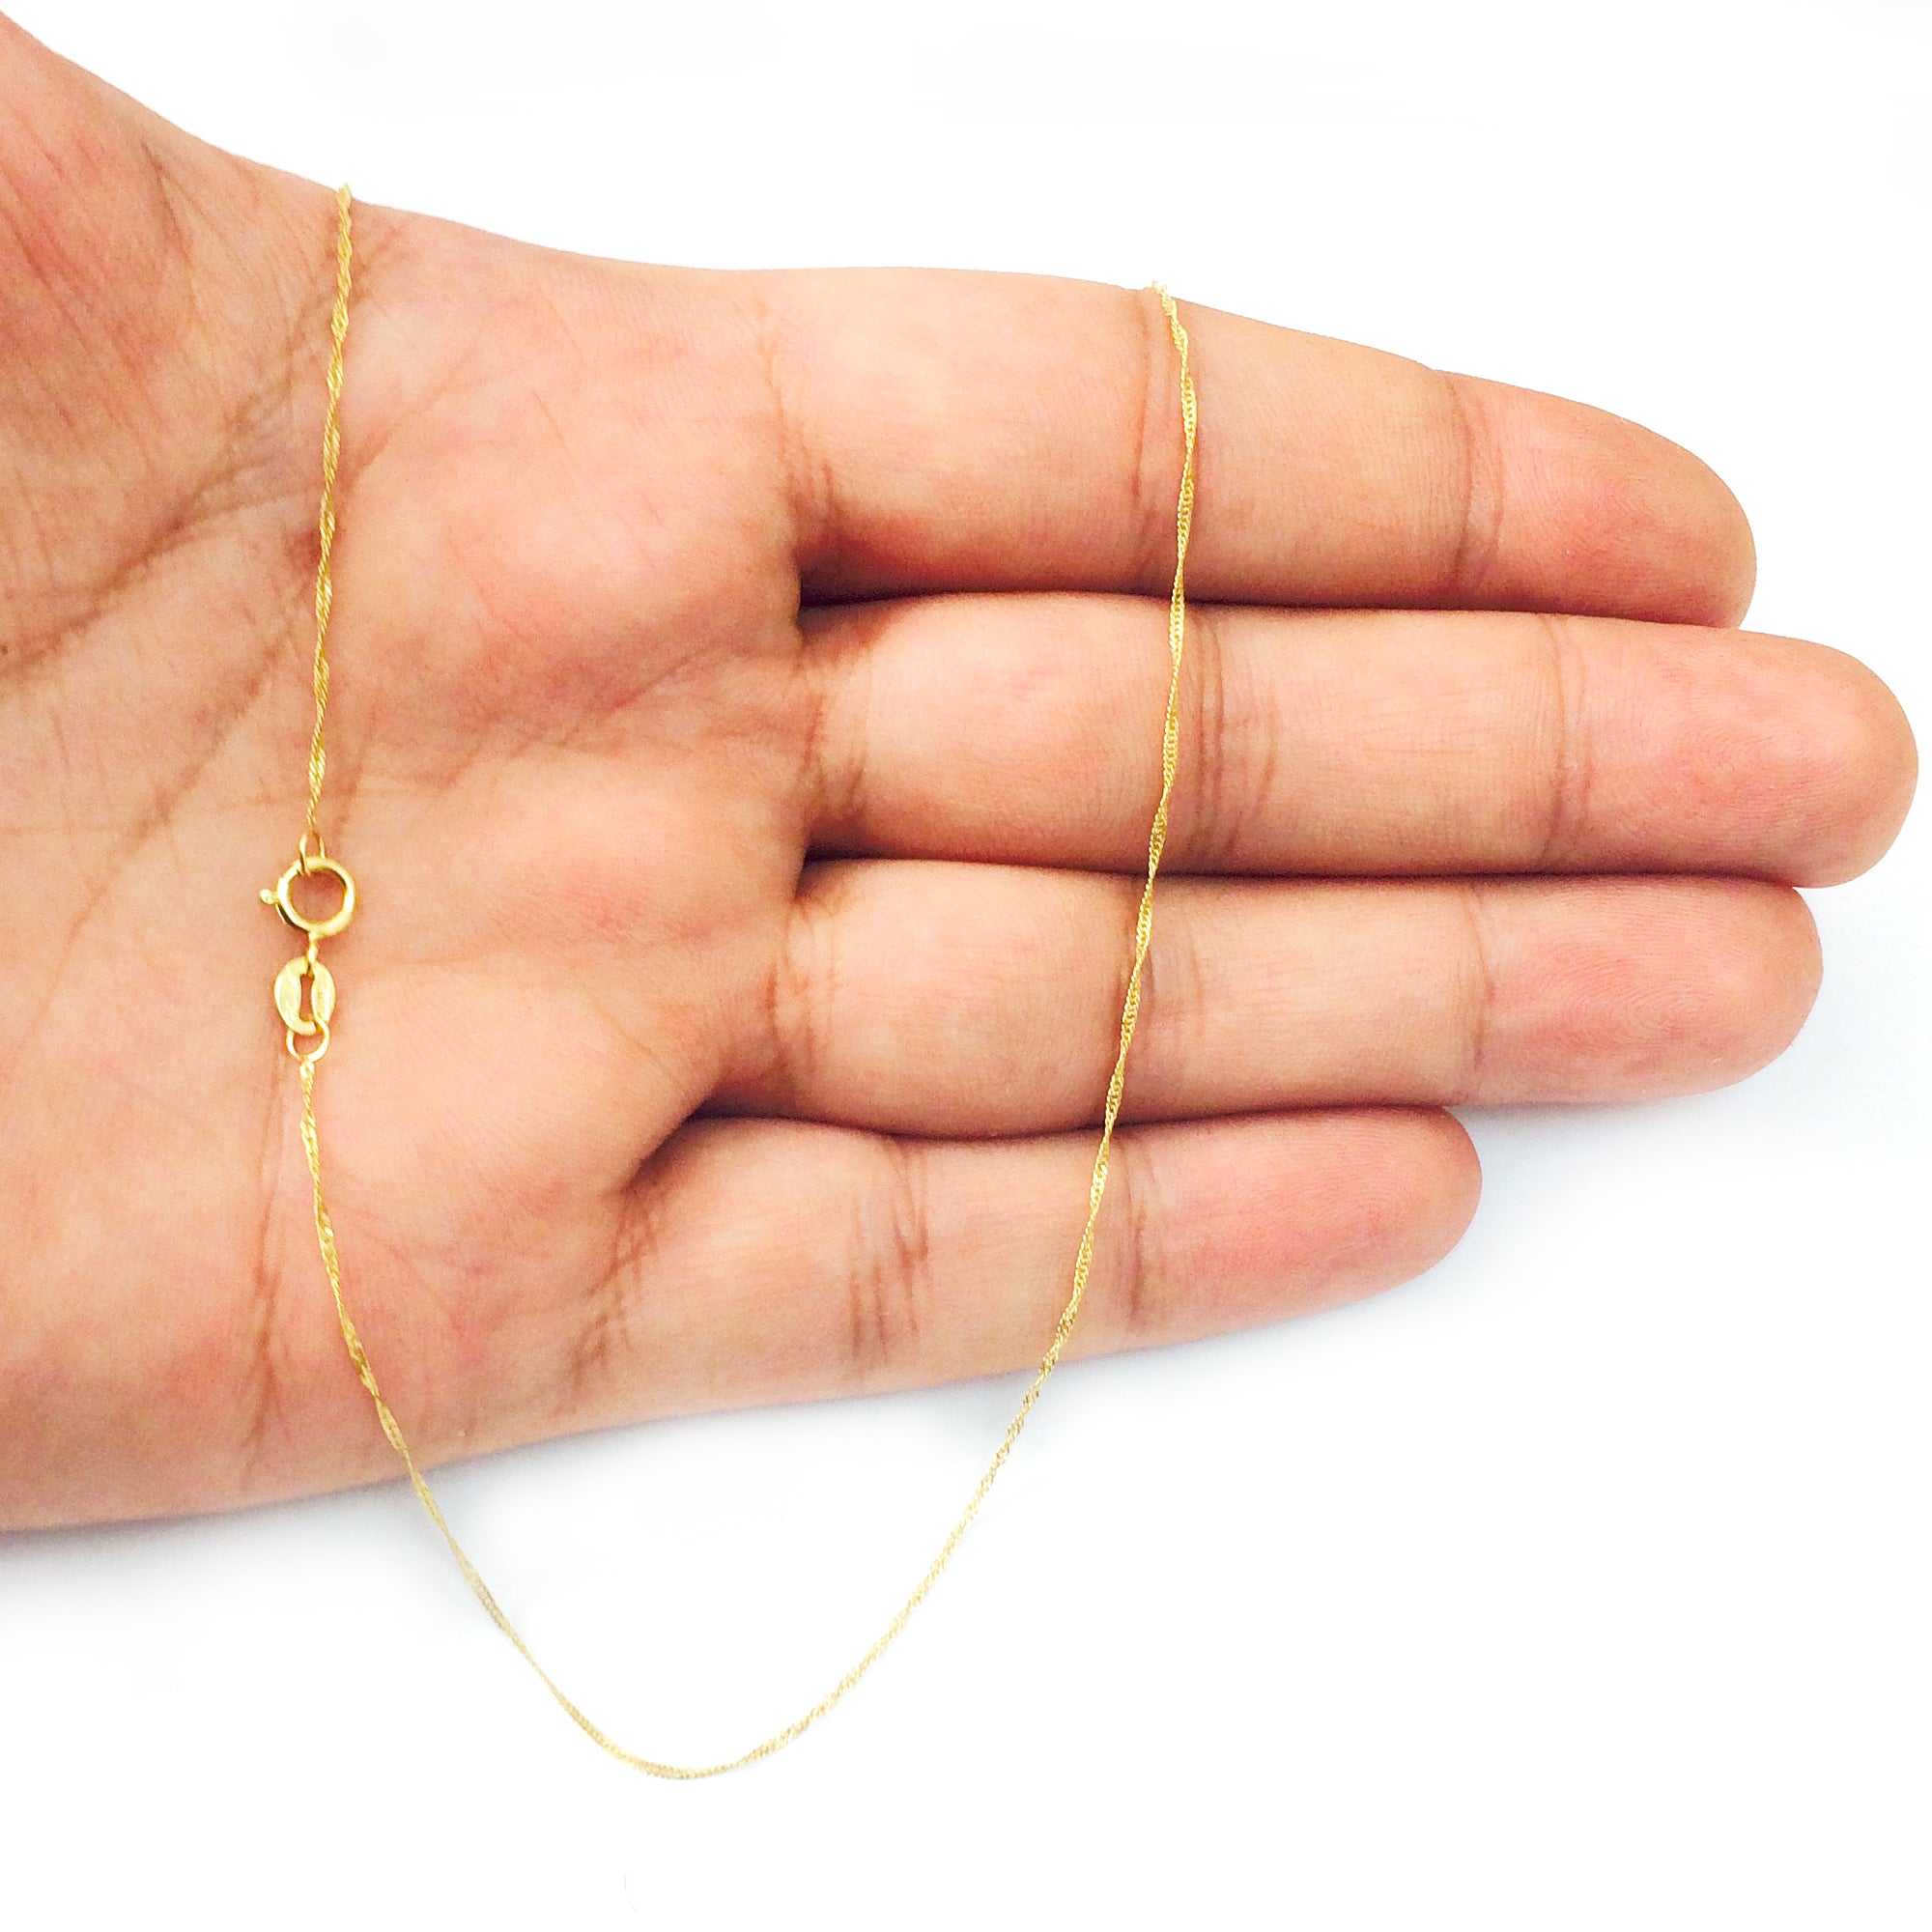 10k Yellow Gold Singapore Chain Necklace, 0.8mm fine designer jewelry for men and women